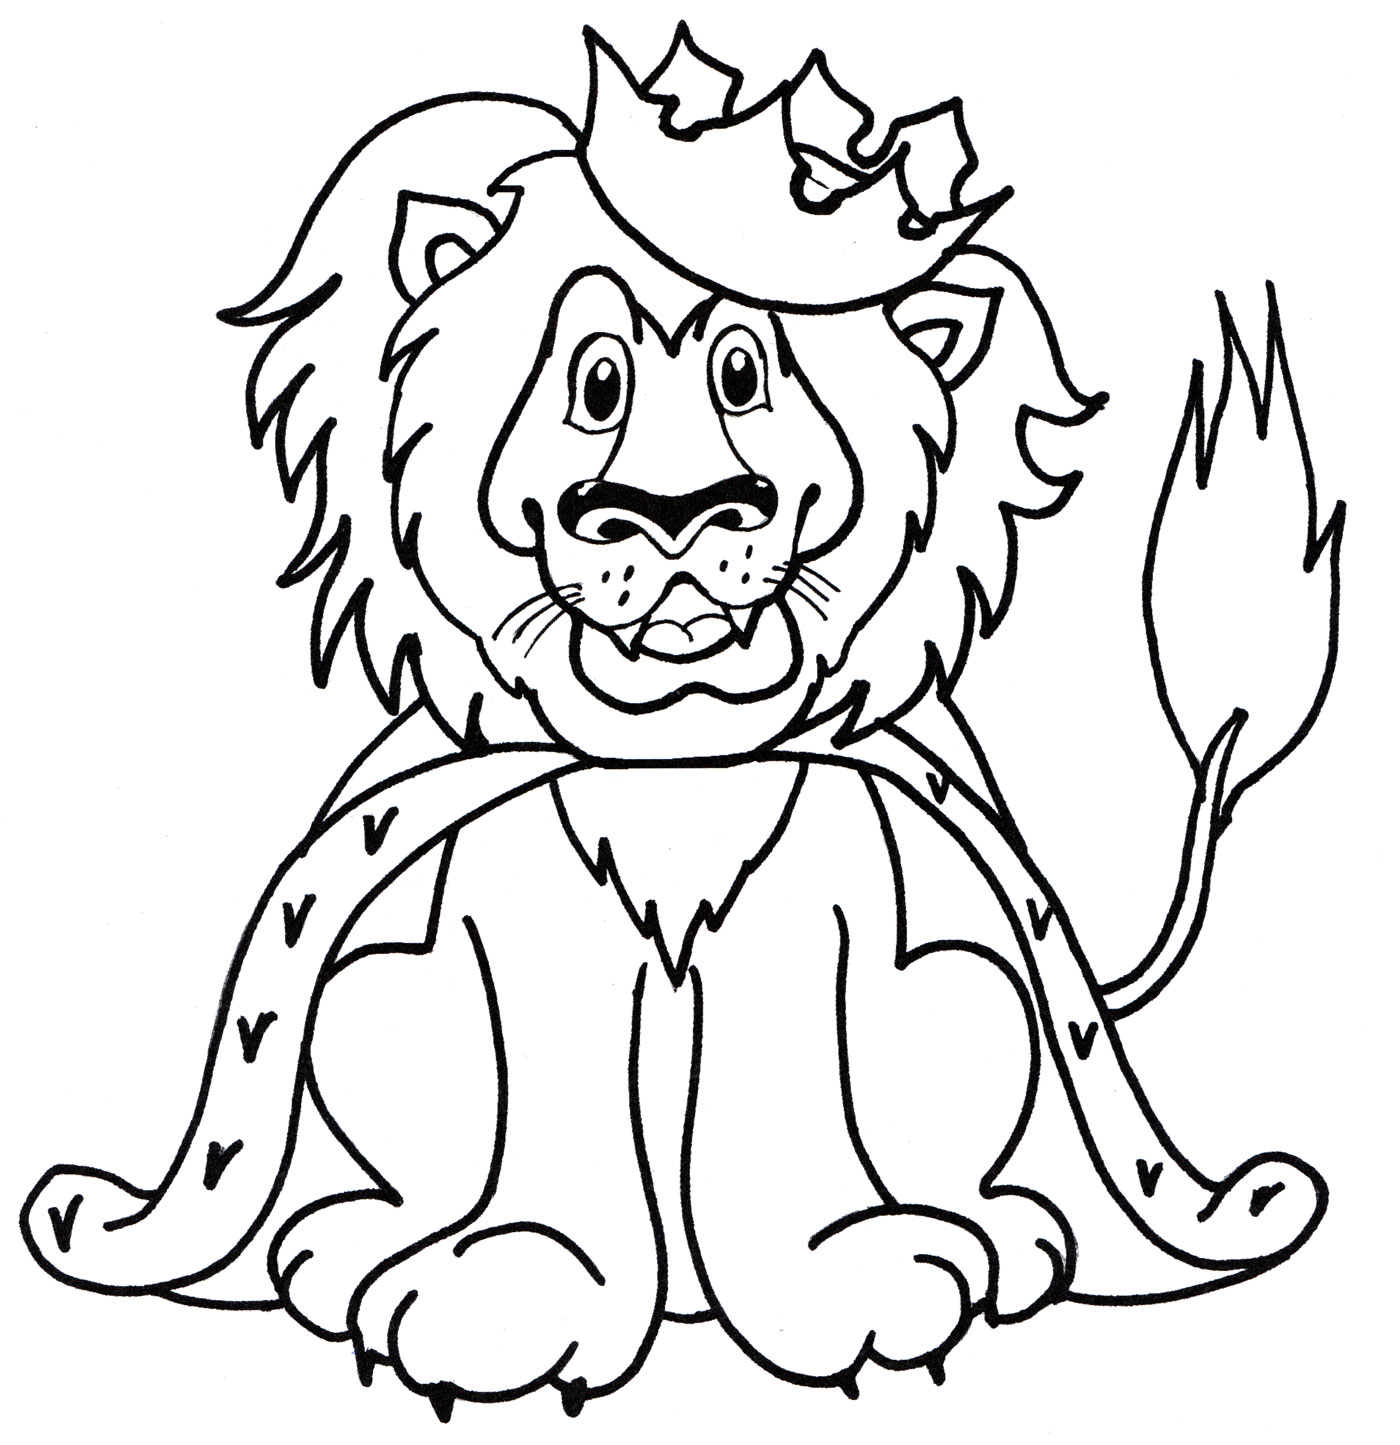 Lion in a crown